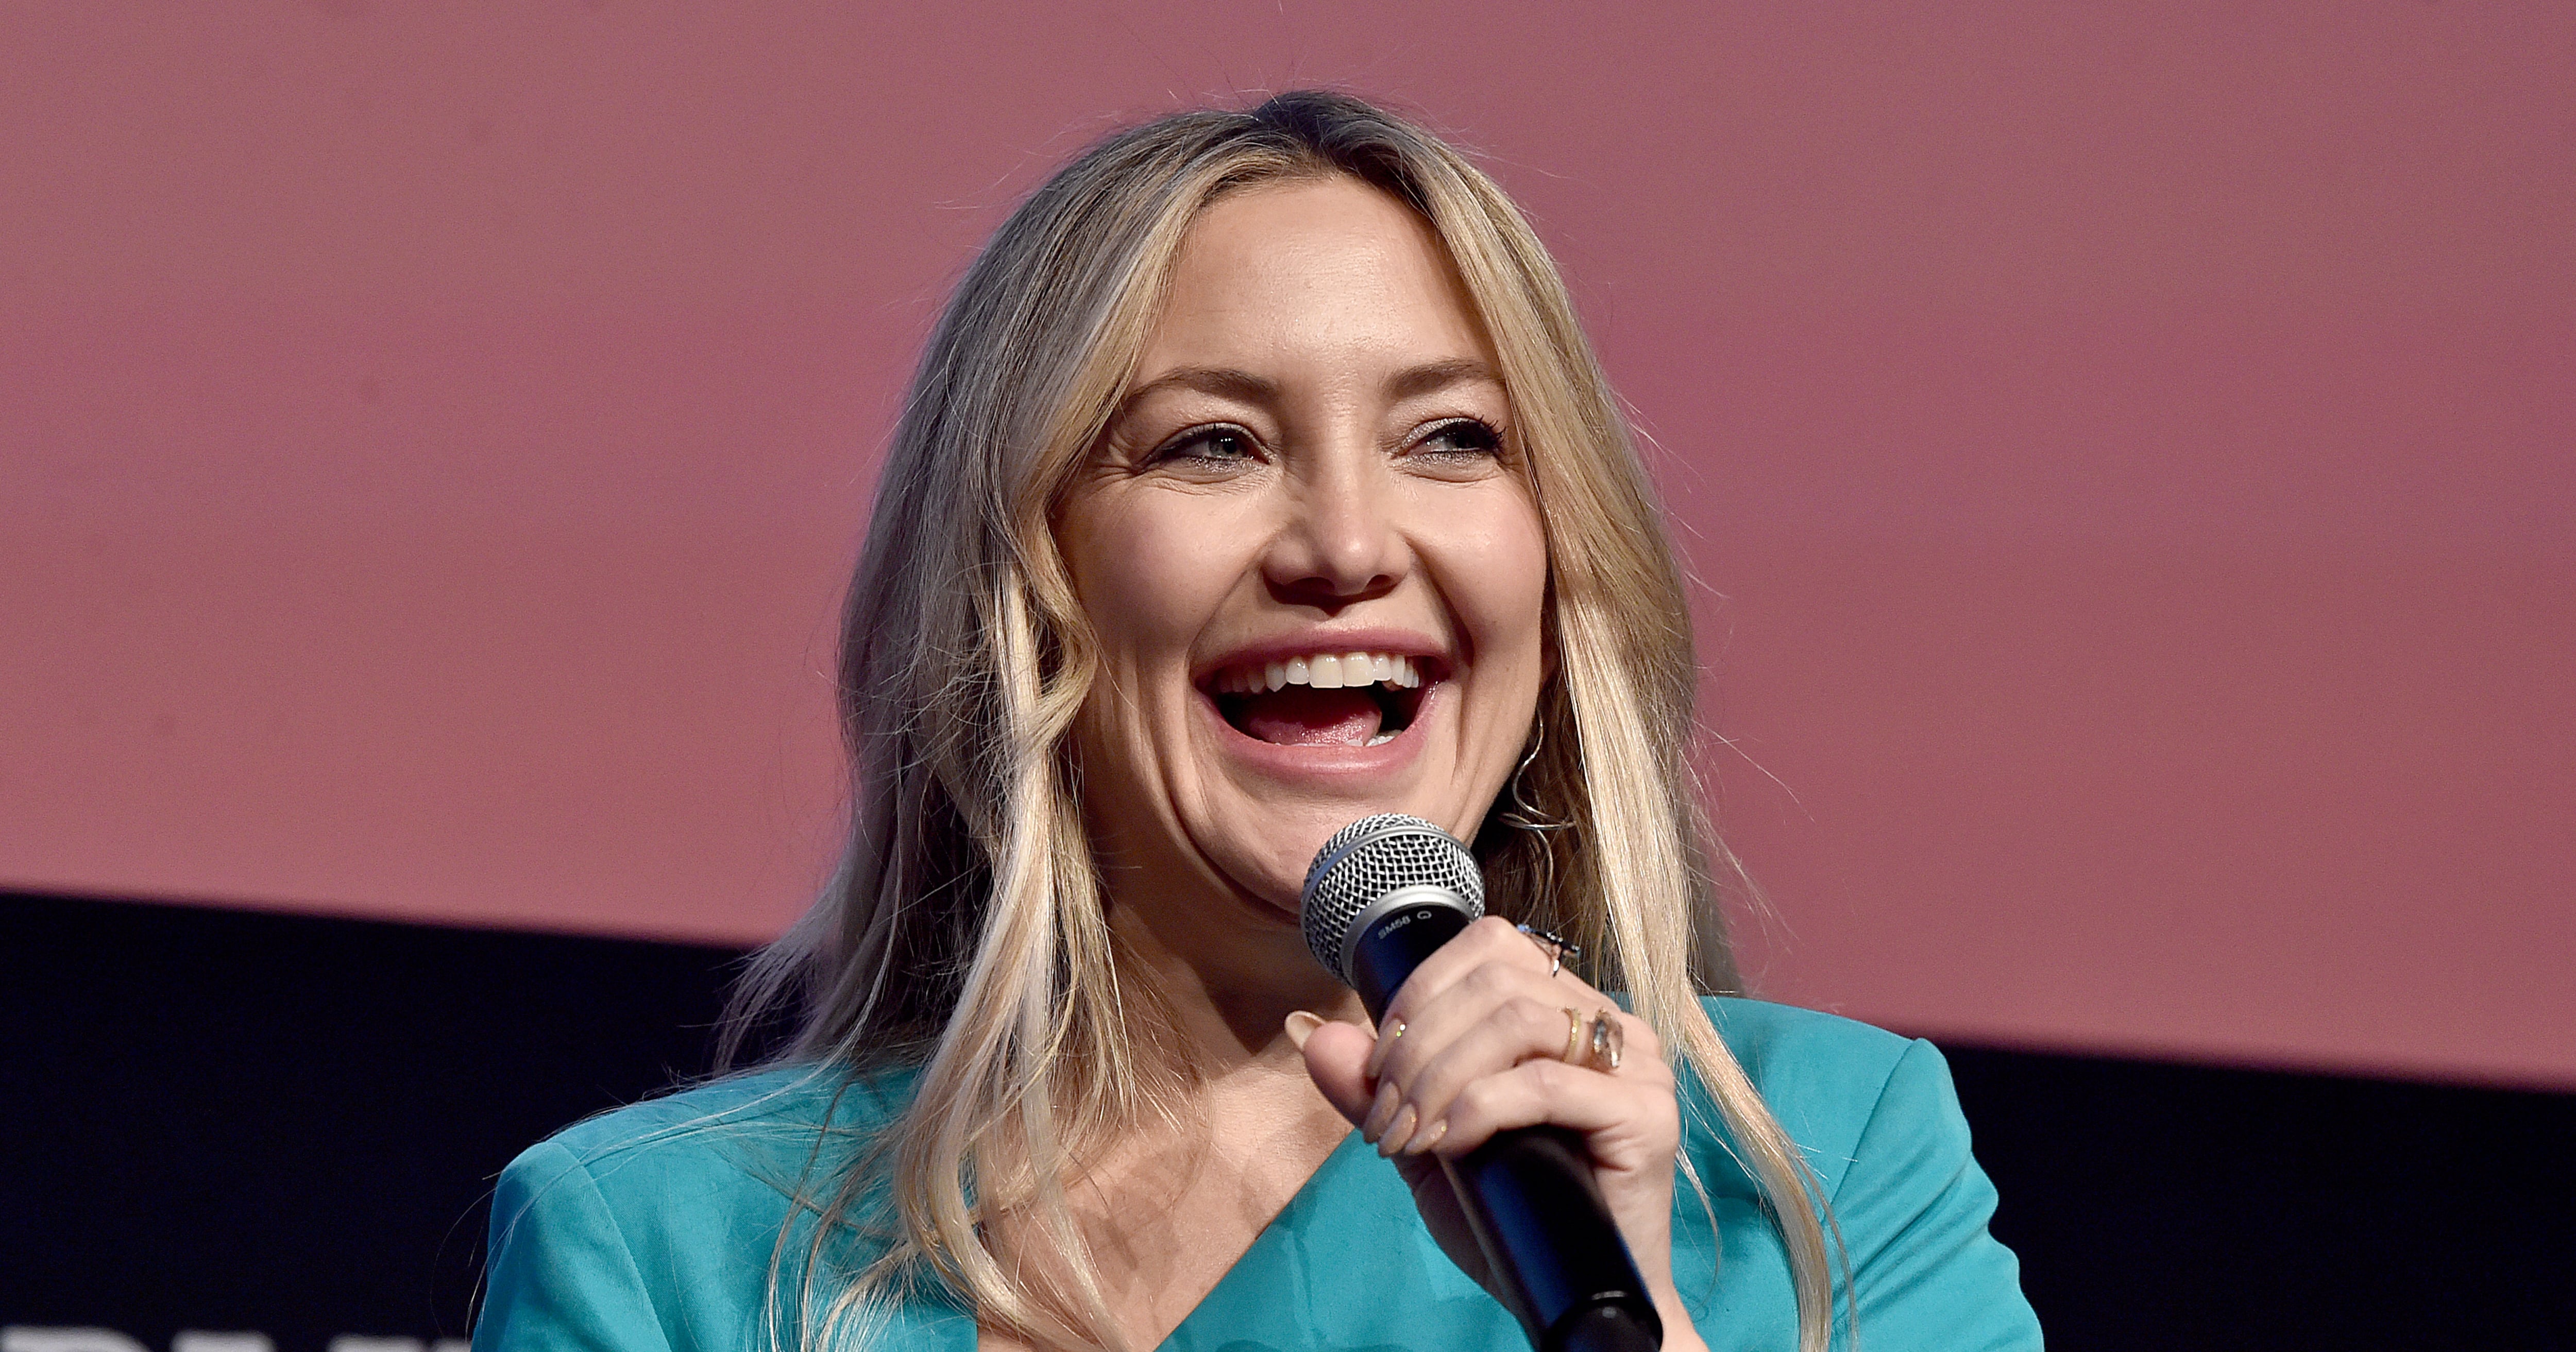 Kate Hudson shares look at her performing at her 1st concert: 'Dreamy' -  ABC News